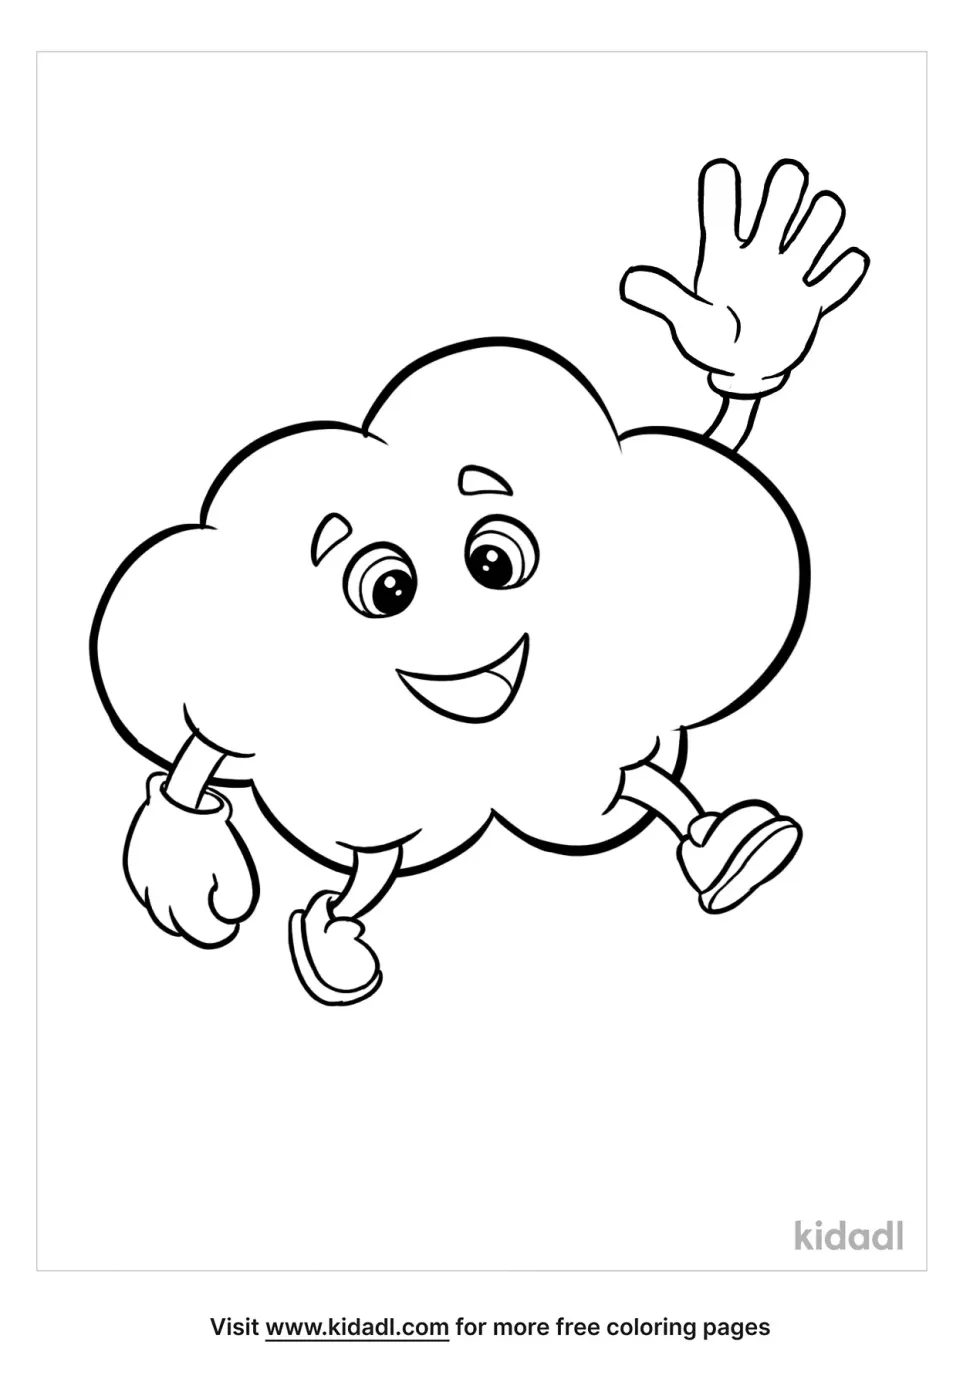 Clouds With Hands And Feet